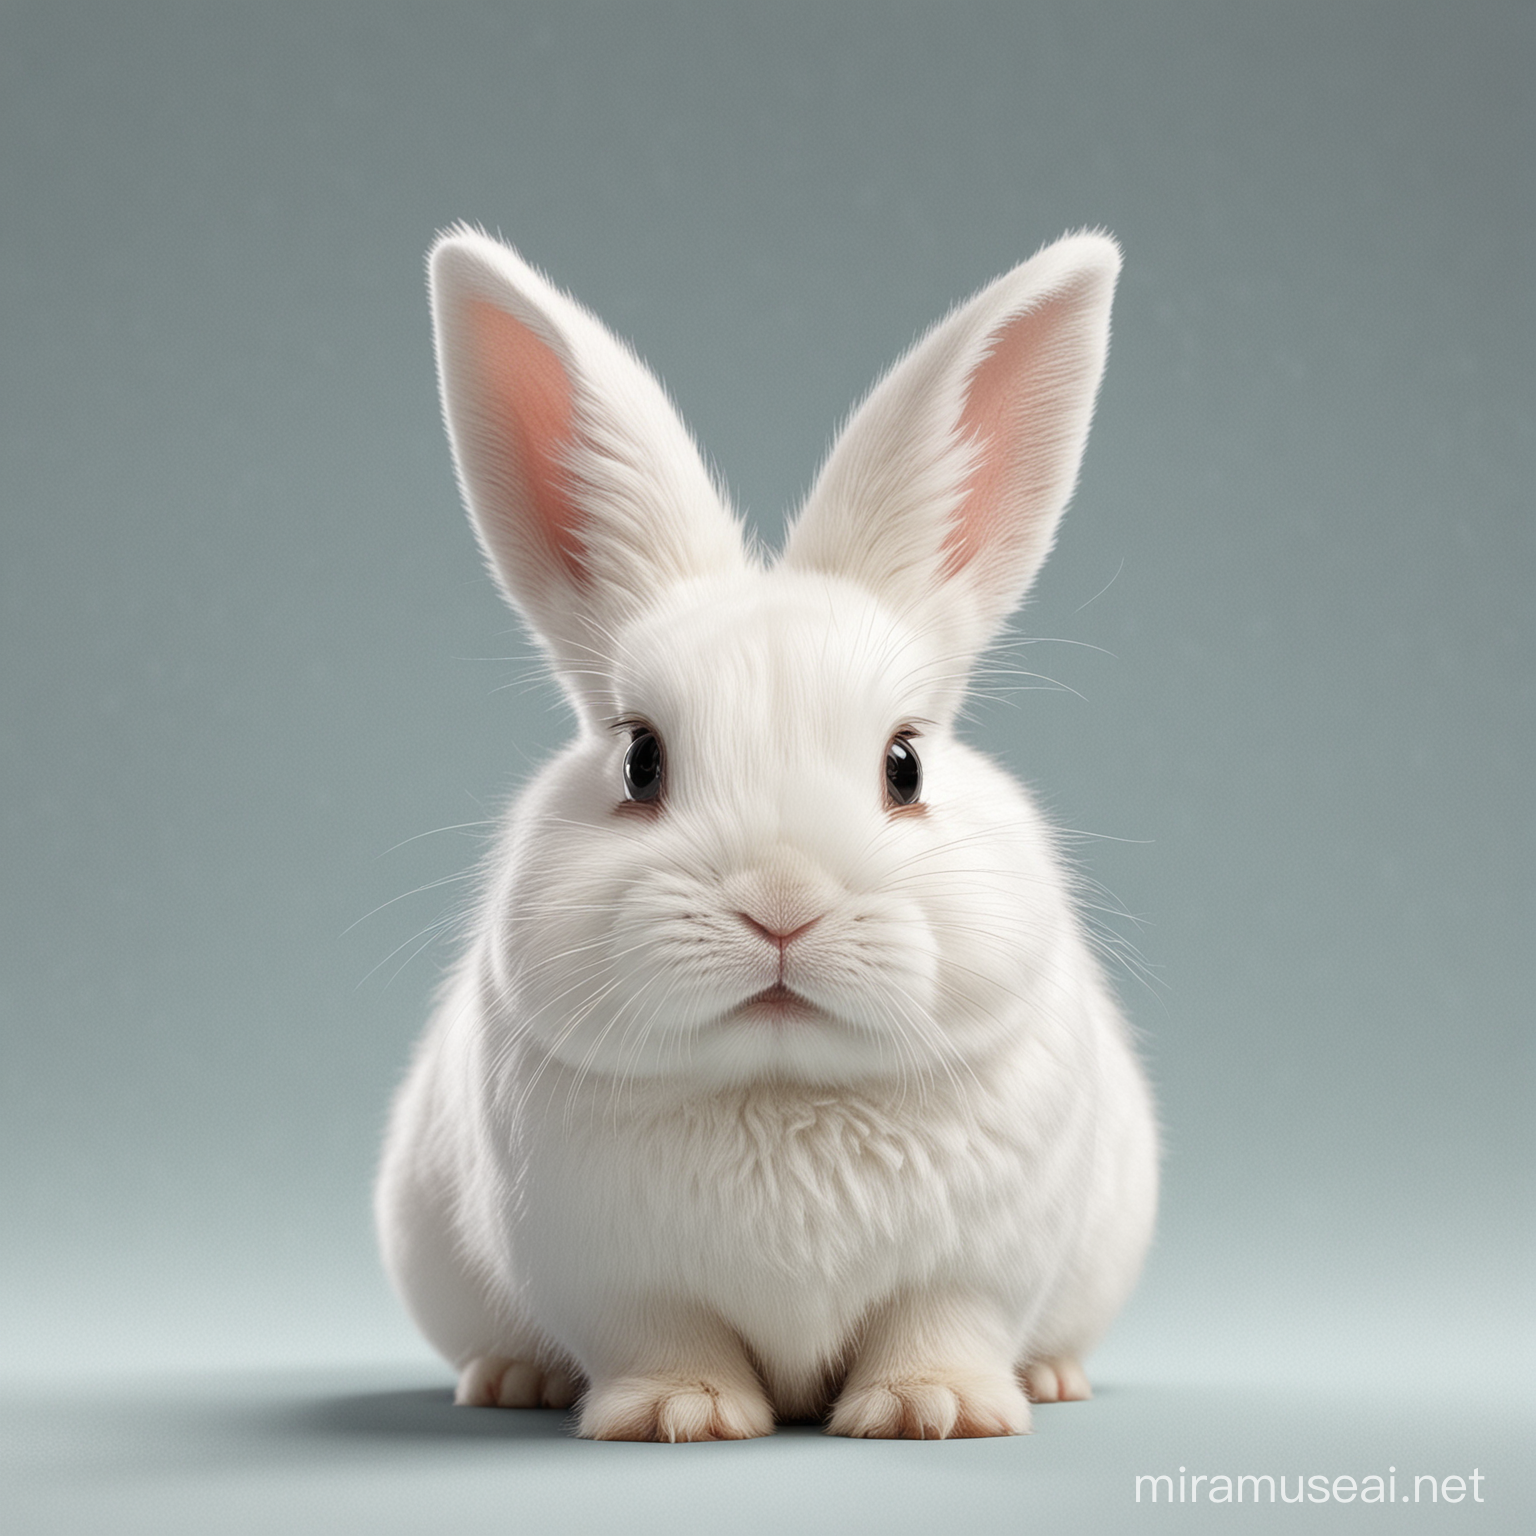 hotot bunny, front face, no background